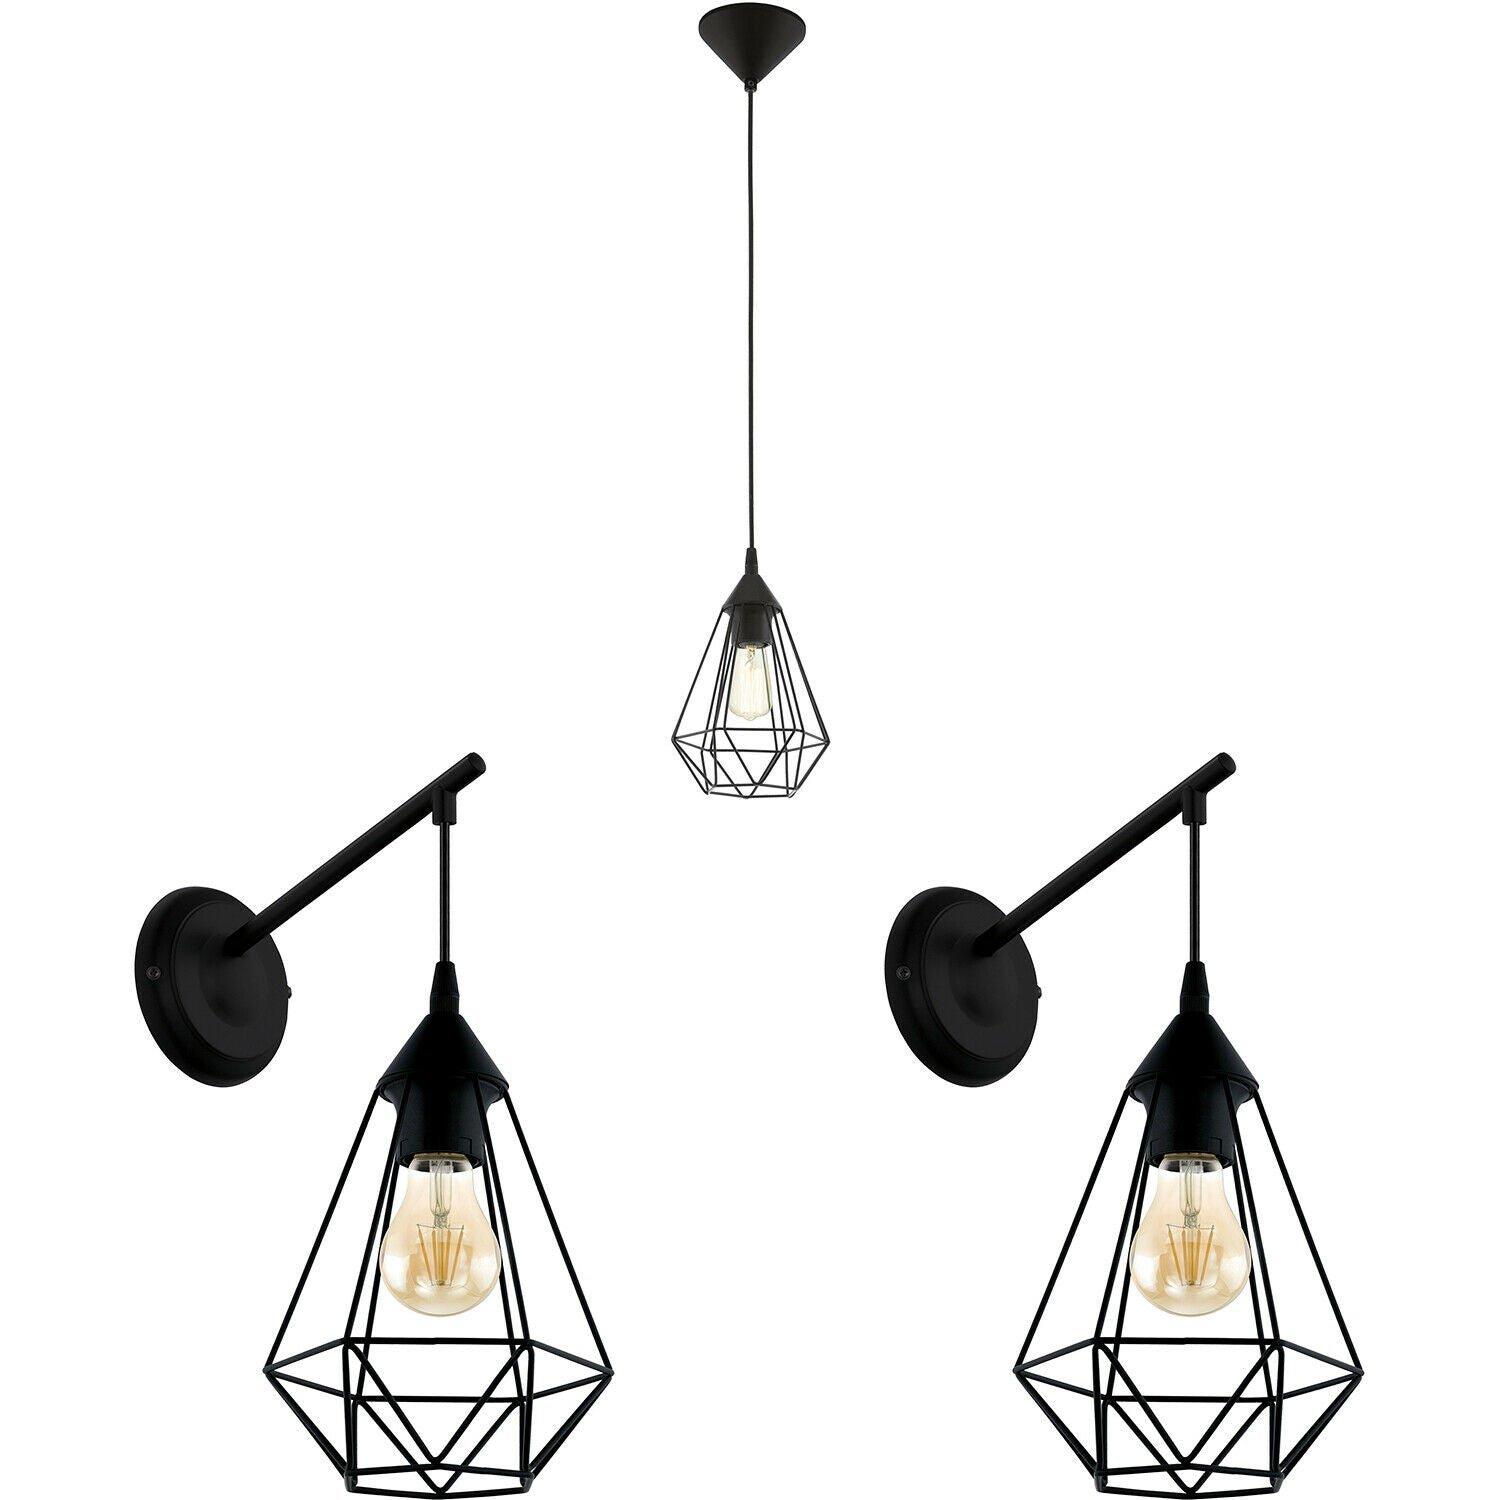 Ceiling Pendant Light & 2x Matching Wall Lights Black Geometric Wire Cage Lamp